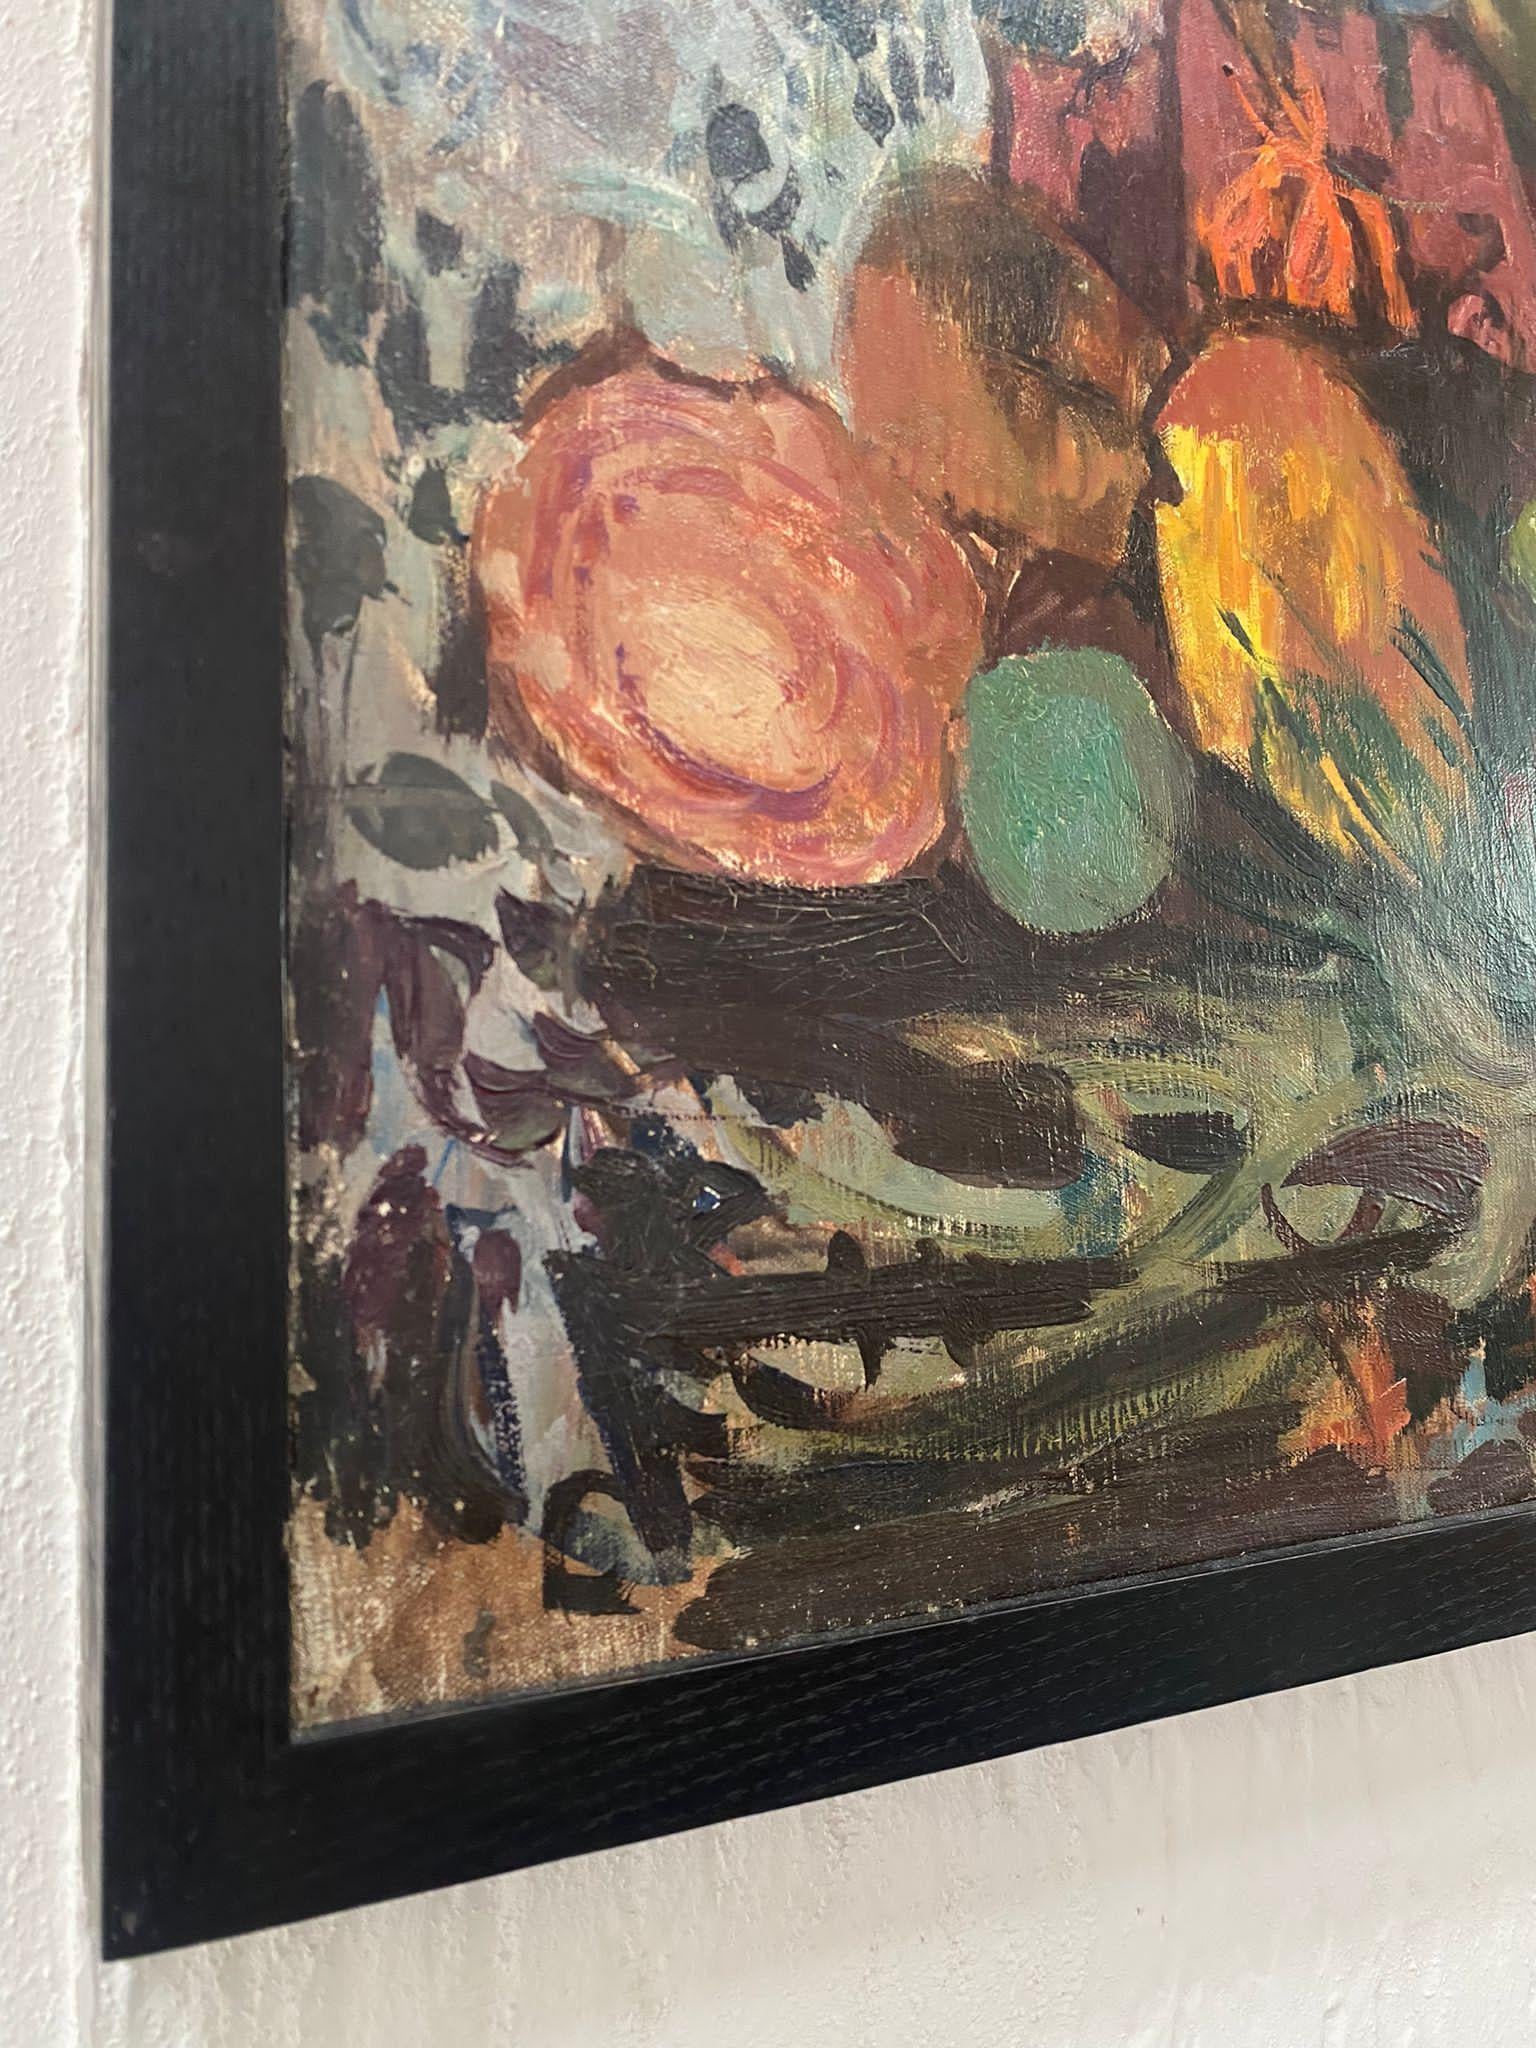 I was delighted to find this evocative and exciting oil on canvas painting by the French Artist Jean Aujame. The piece is entitled 'Lune Dormeuse Aux Champignons', and was exhibited in his retrospective. It was painted in 1955 at the height of his